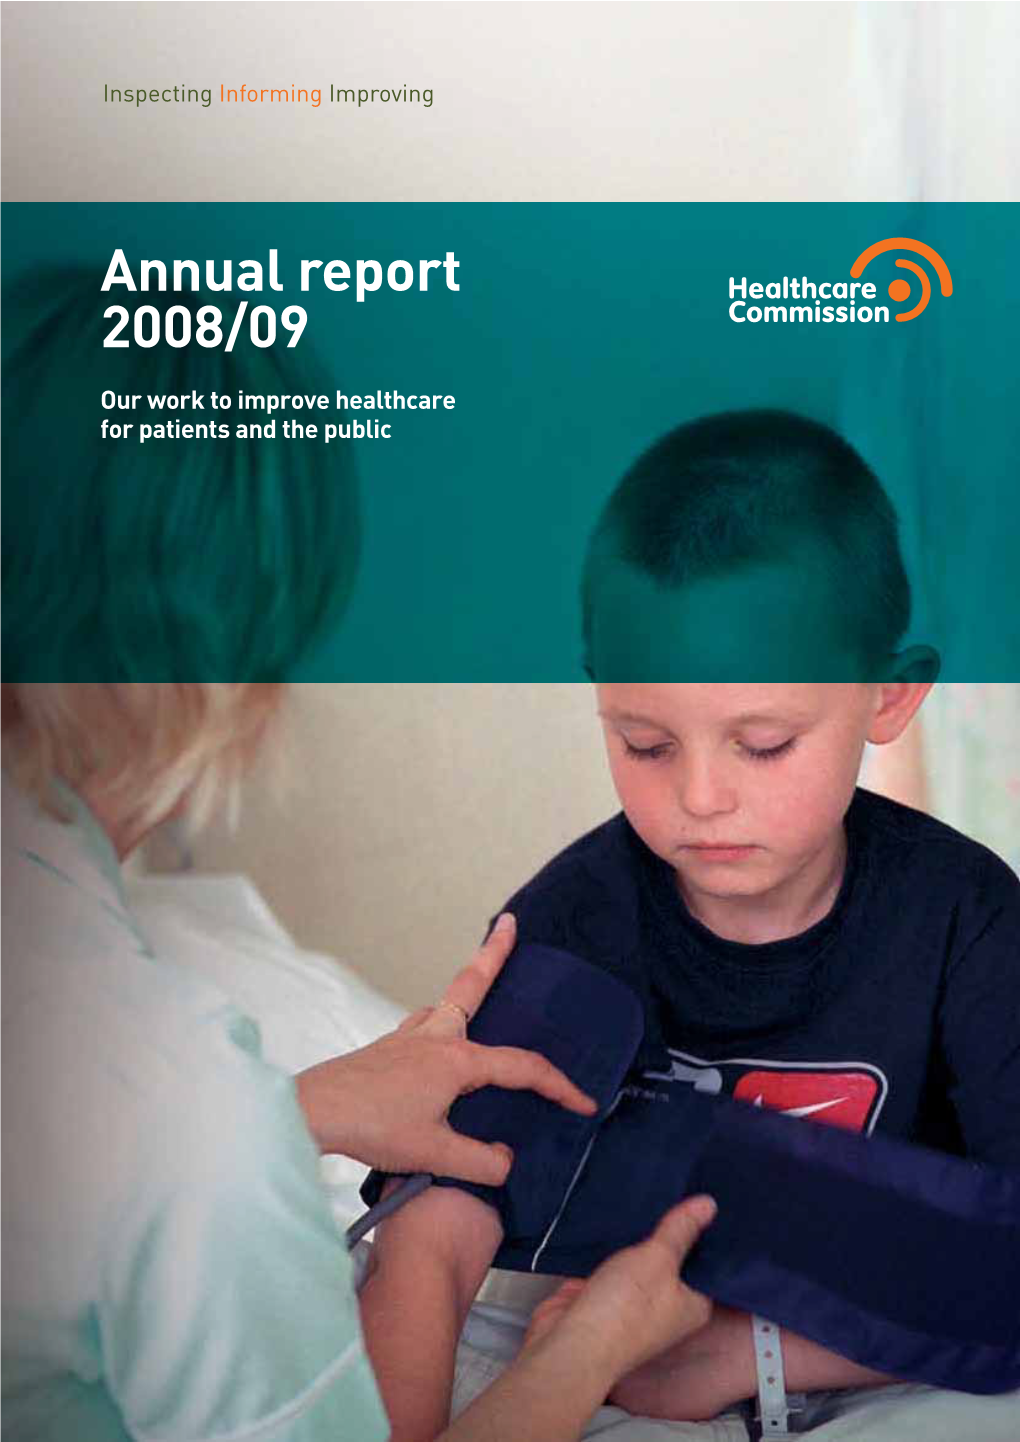 Healthcare Commission Annual Report and Accounts 2008/09